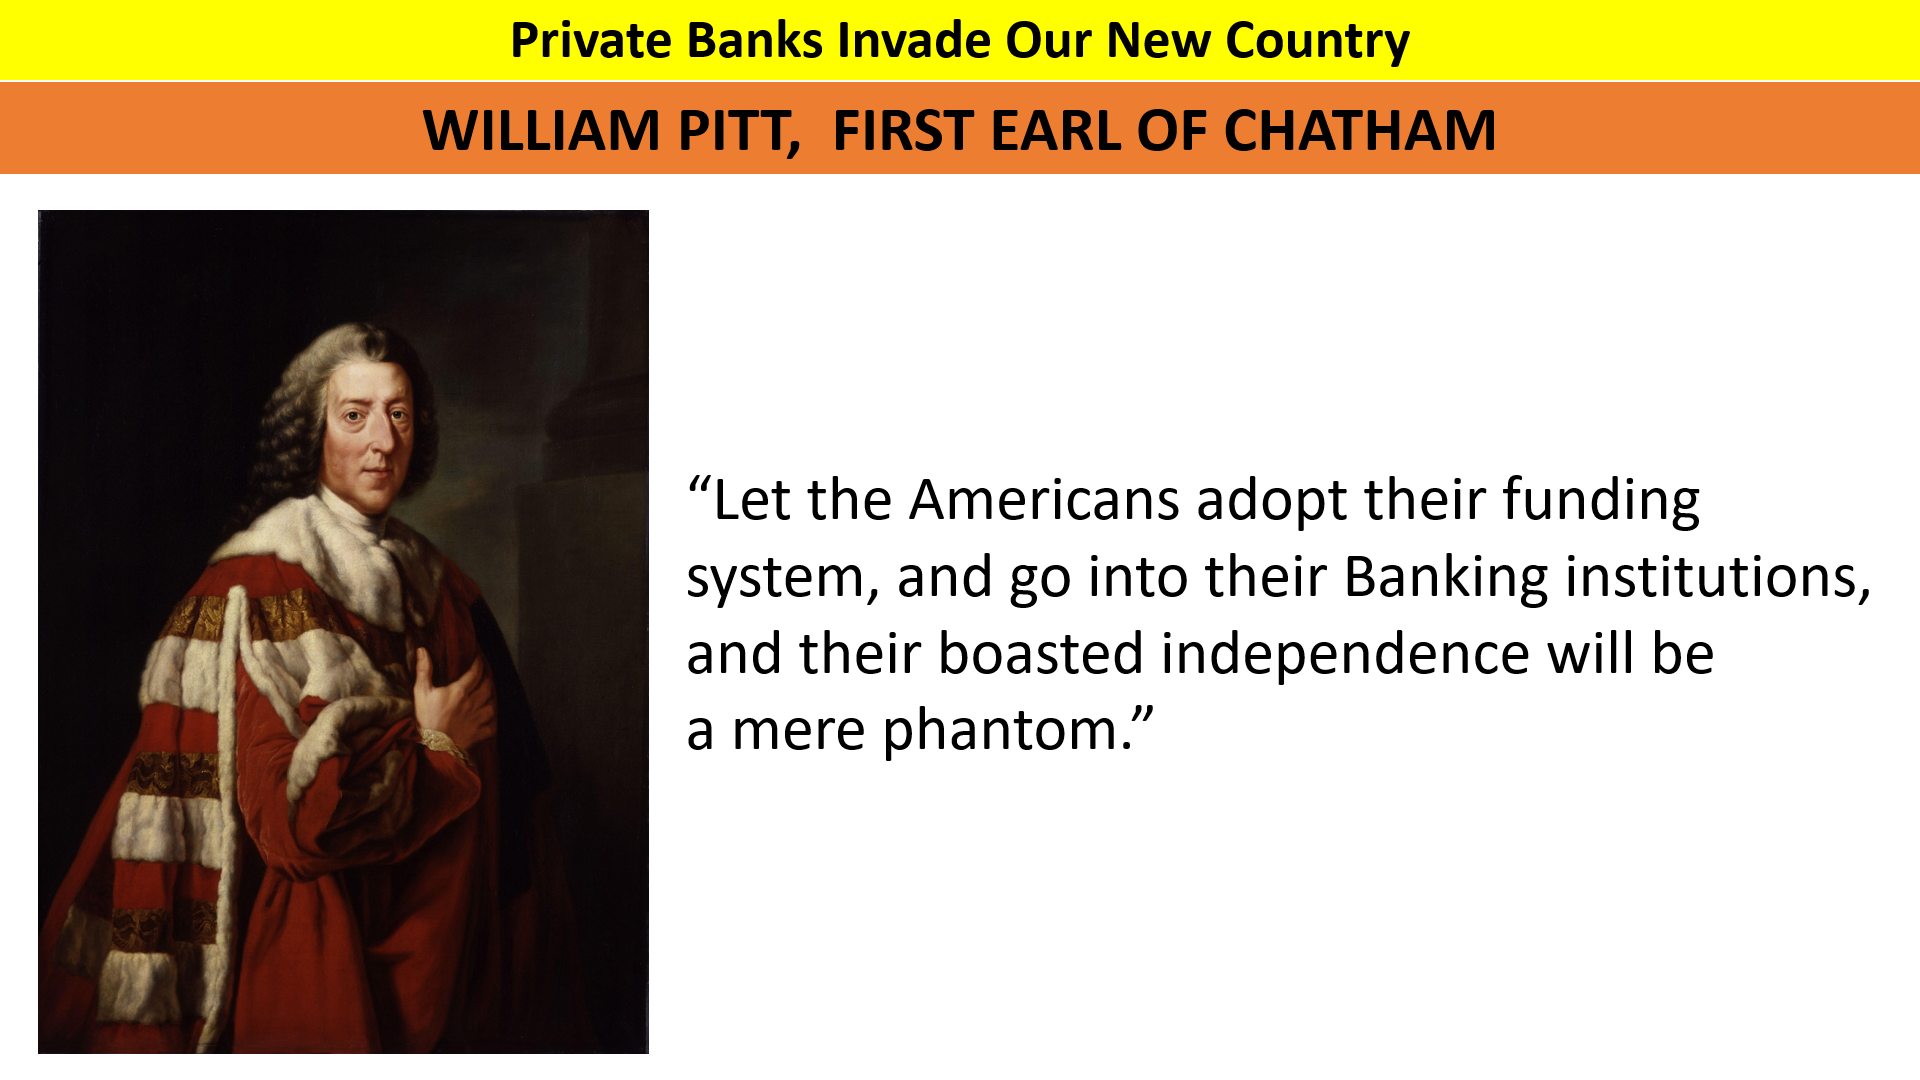 if Americans adopt banks of issue, their independence will be a mere phantom